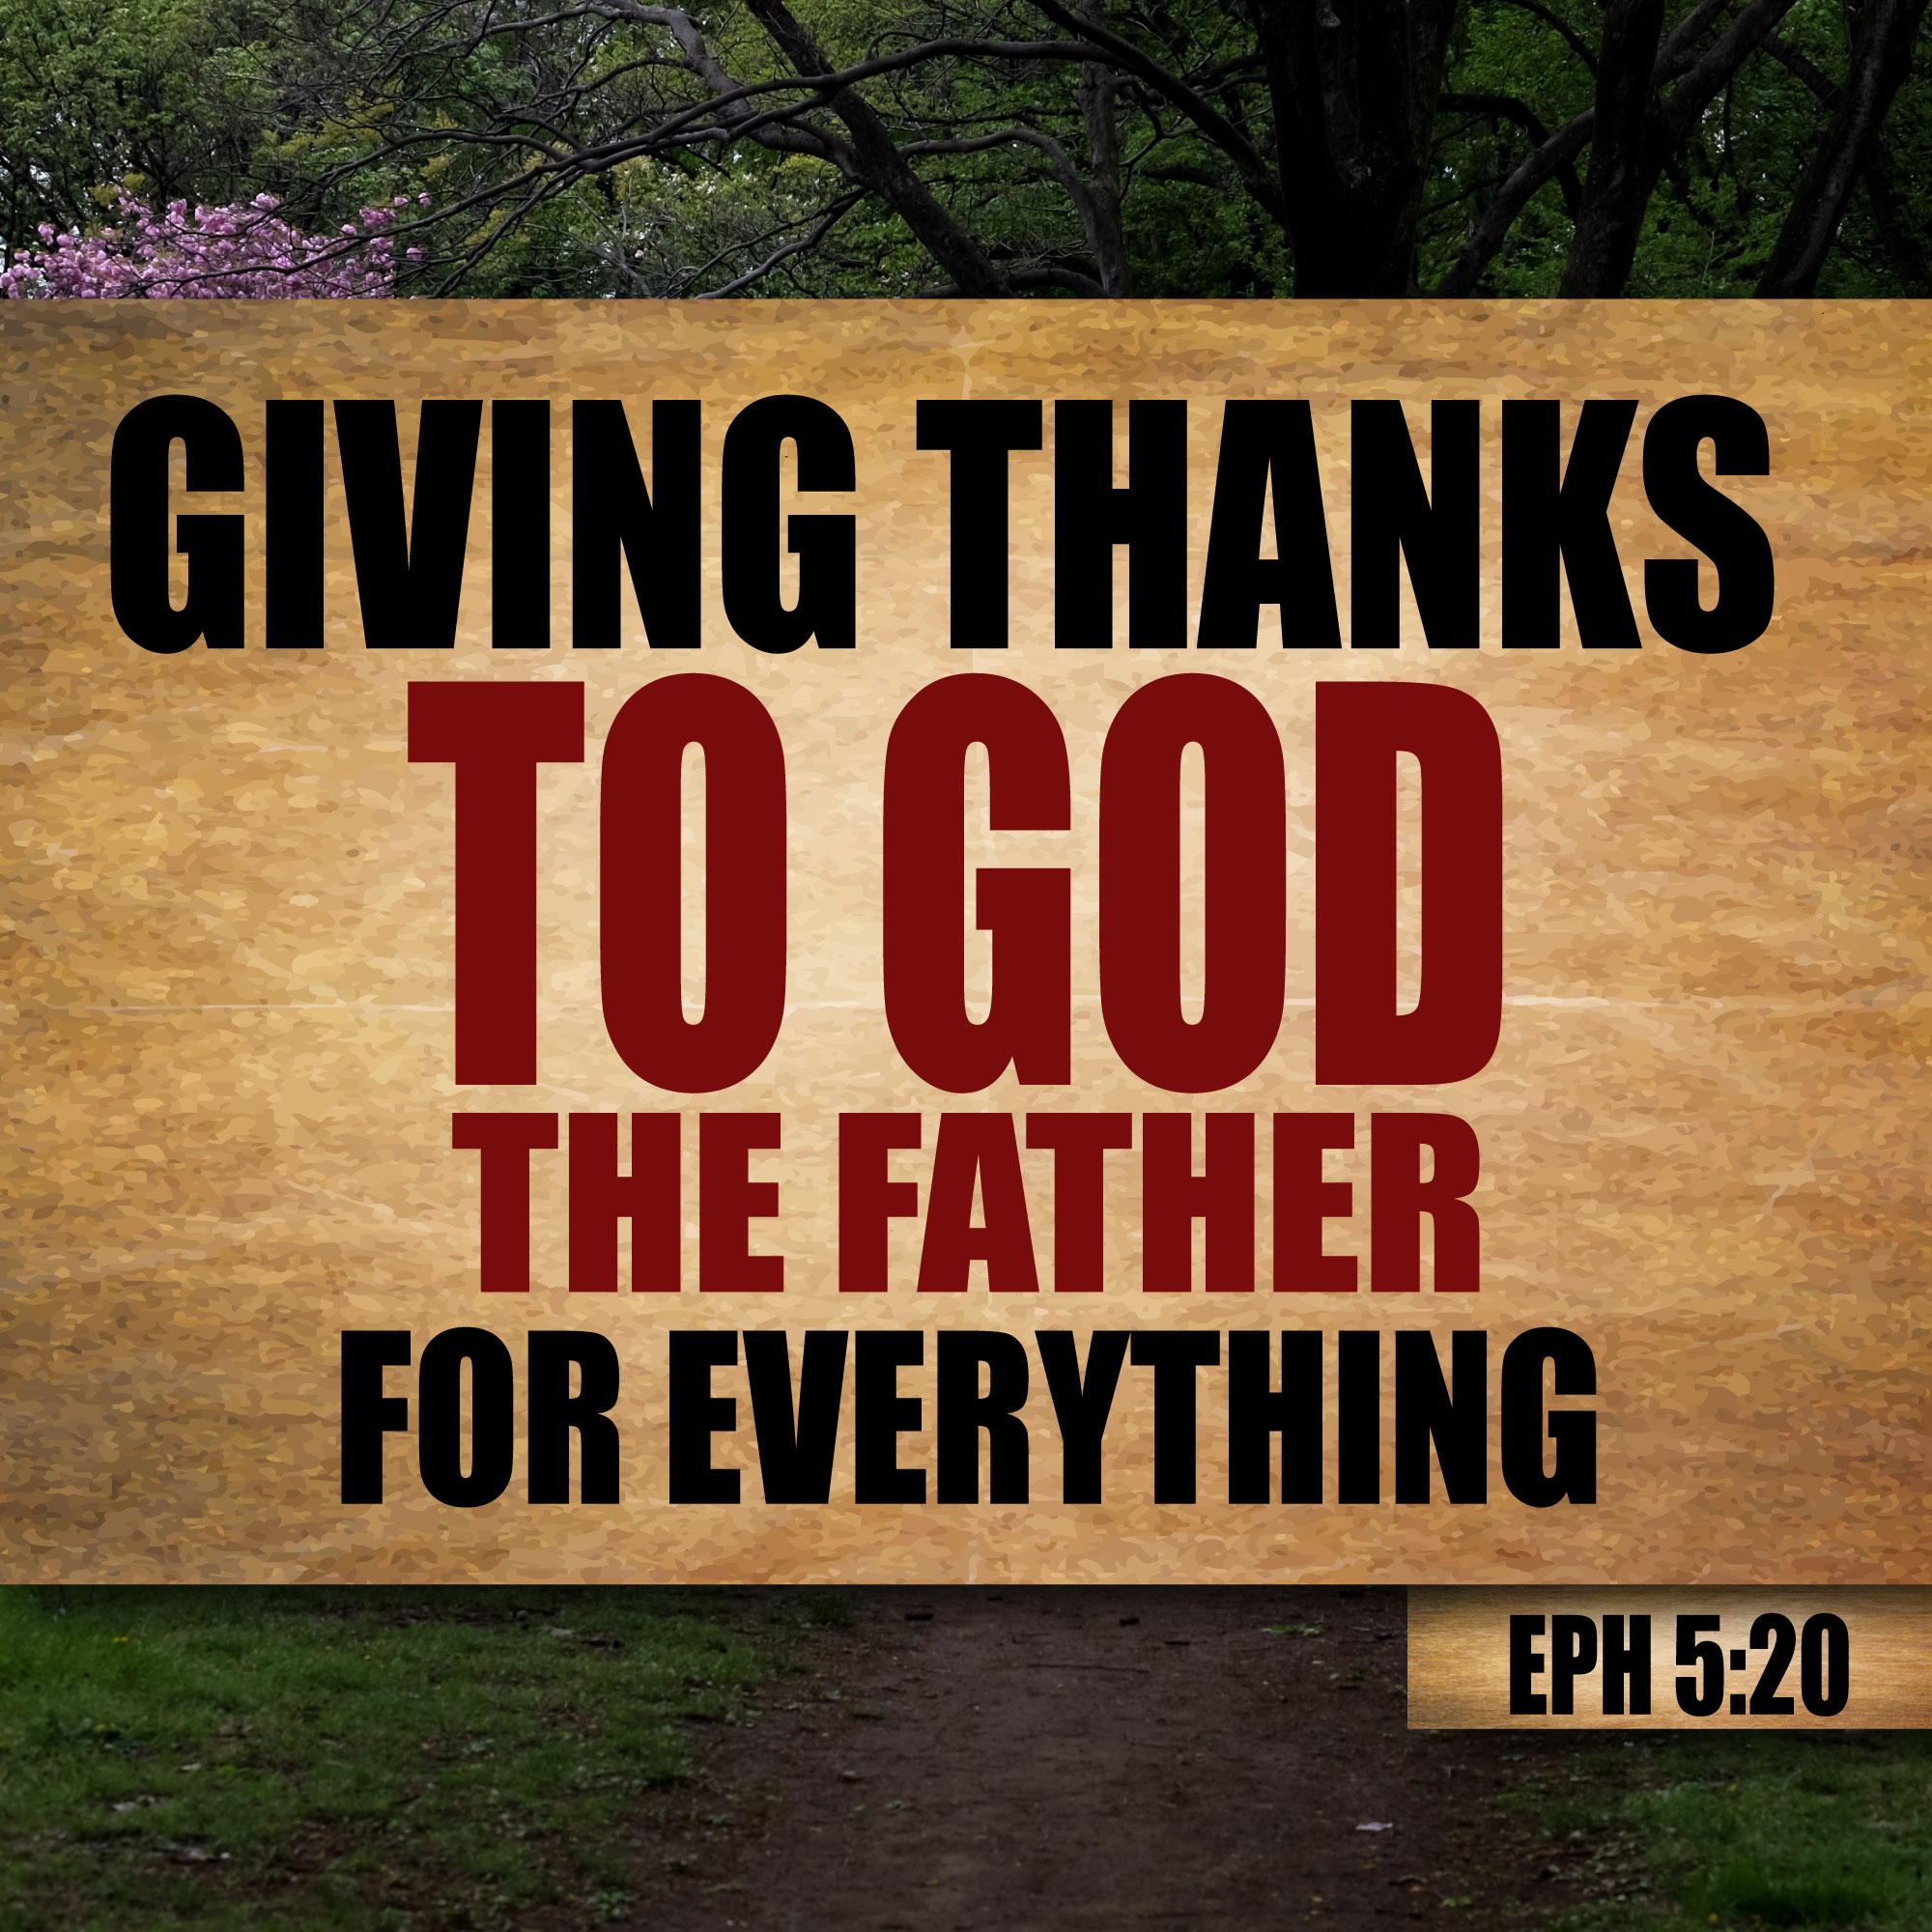 Thanksgiving Ephesians 5:20 Giving thanks to God the Father for everything.